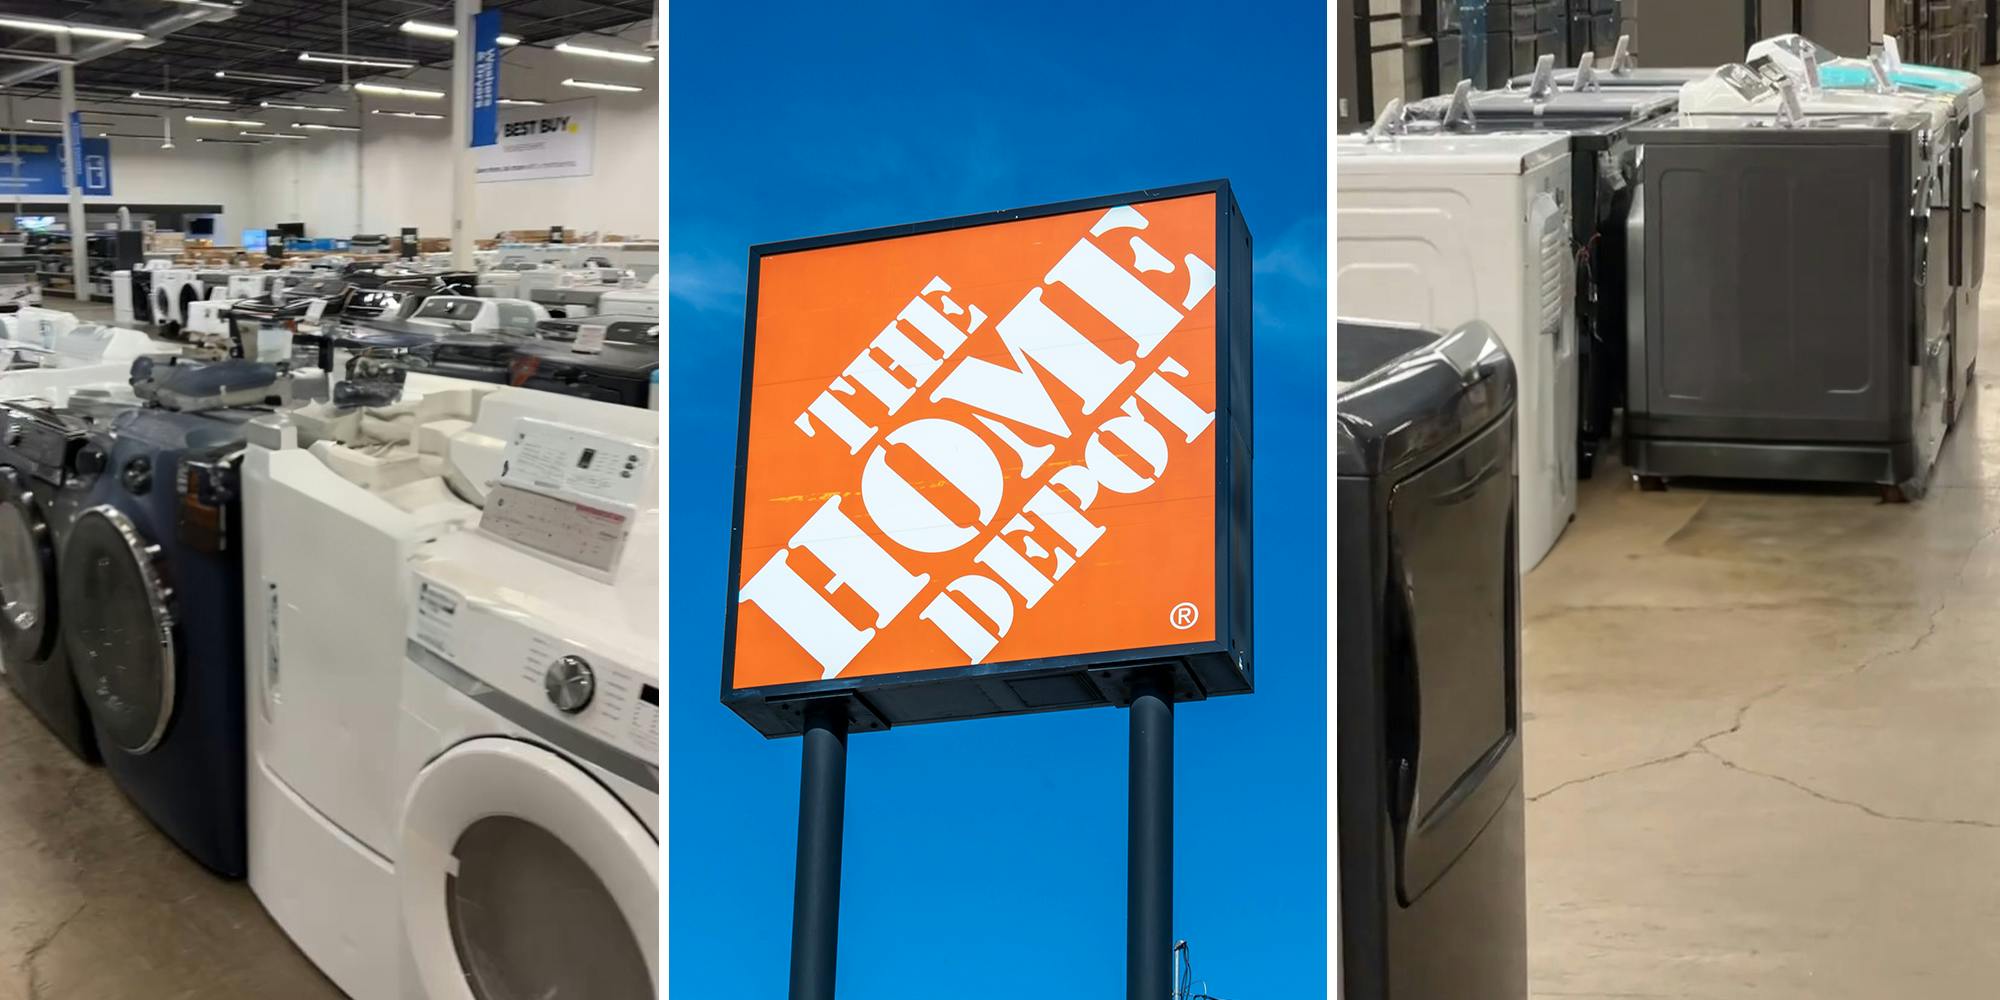 ‘Customers don’t know what they have in their home’: Woman tells people to stop buying this type of dryer after seeing all the open box returns at Home Depot